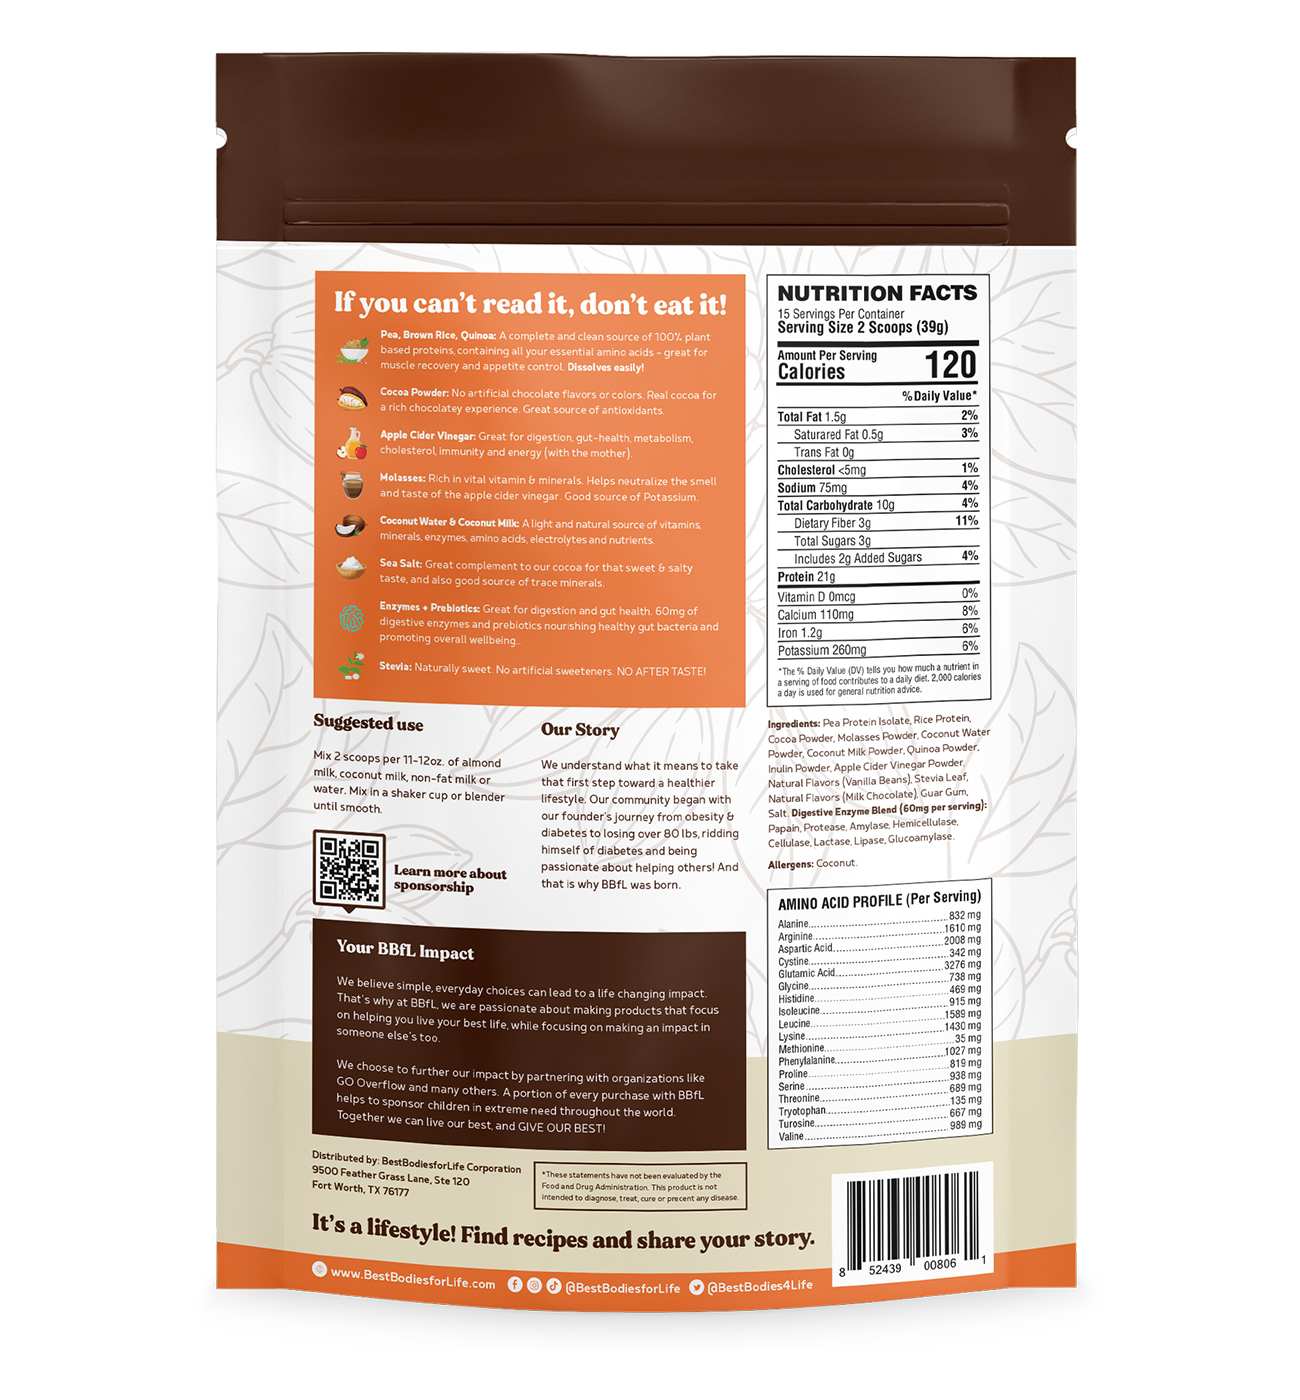 BestBodiesForLife 15g Protein & Meal Replacement Shake - Cocoa Cream; image 2 of 2